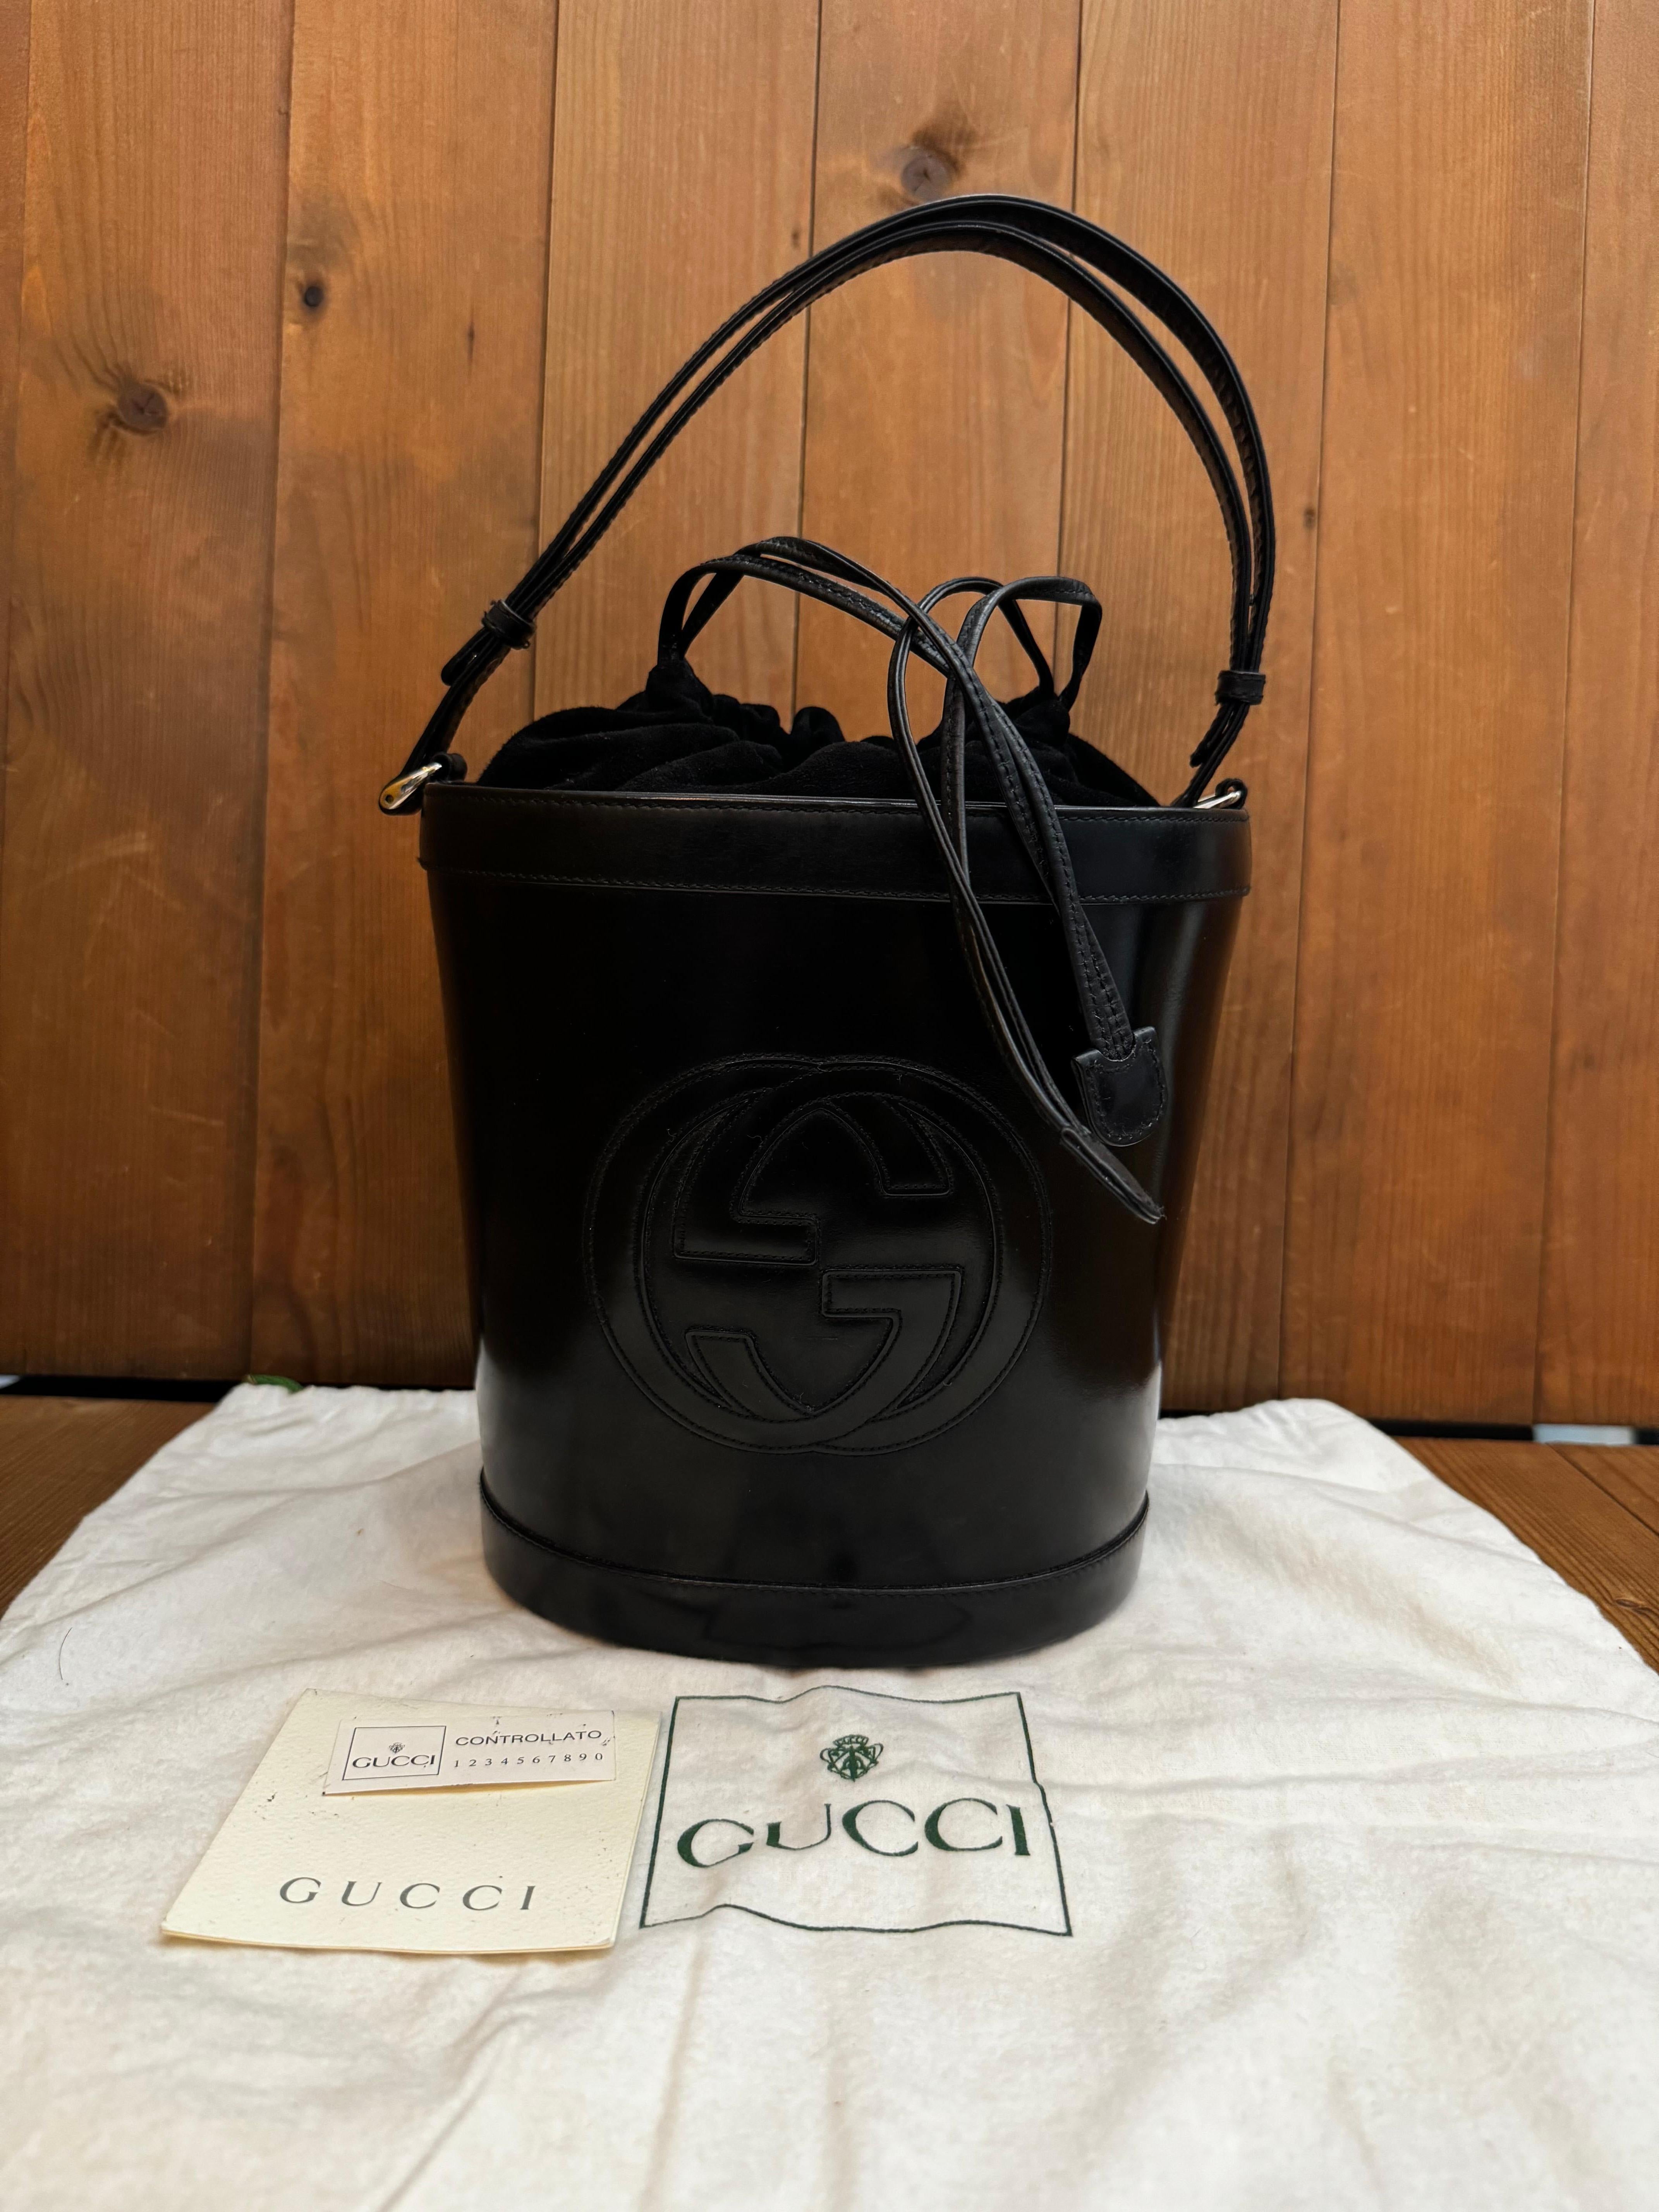 This vintage GUCCI 2-way bucket bag is crafted of smooth cowhide leather and nubuck leather in black. Top drawstring closure in nubuck leather opens to a coated interior which has been professionally cleaned featuring a zippered pocket. This Gucci